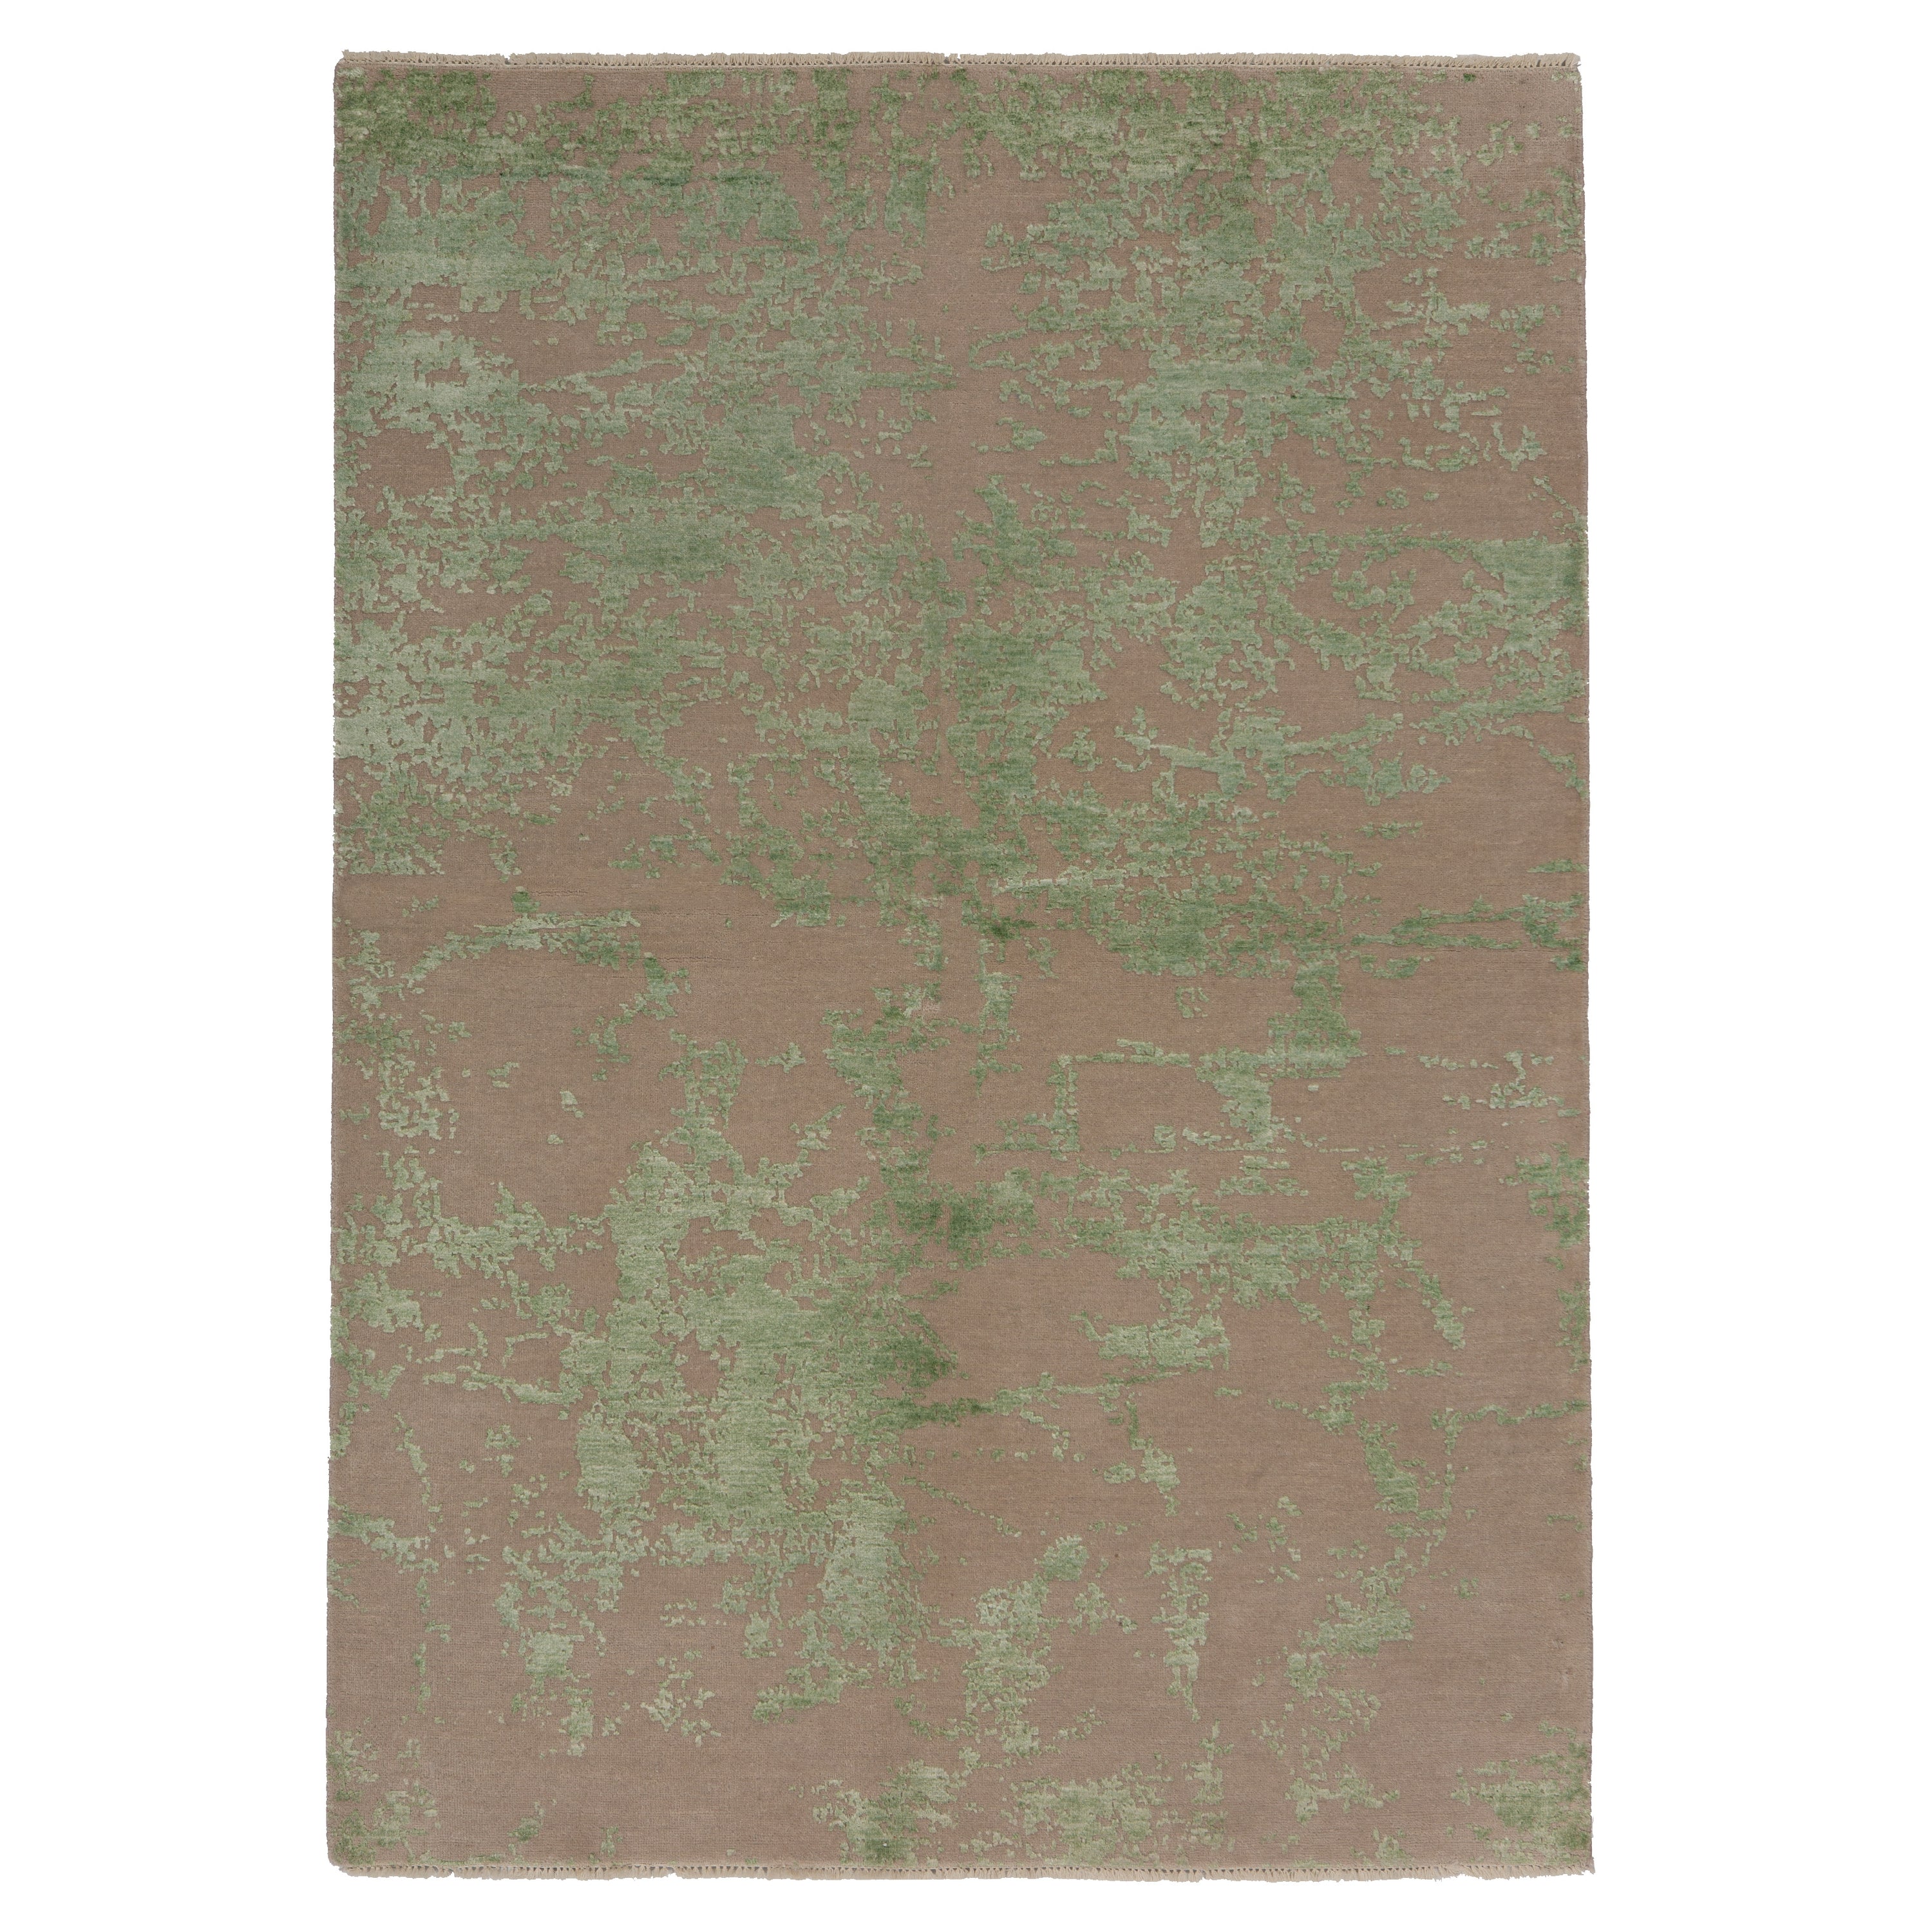 Hand-knotted Wool Rug - 6'10" x 4'10" Default Title